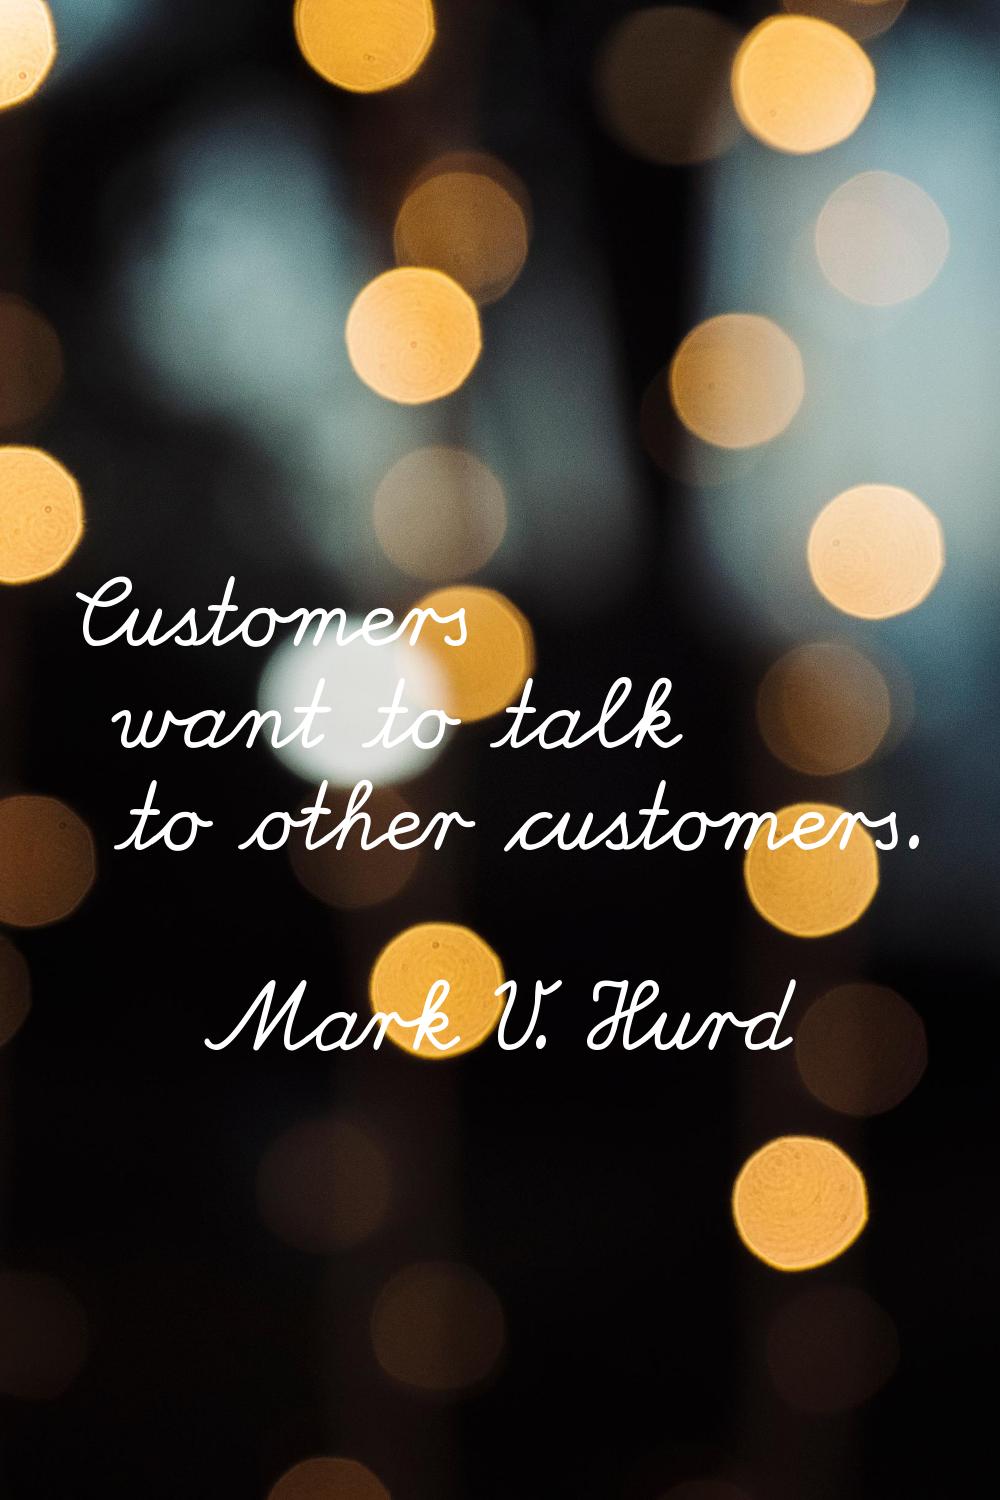 Customers want to talk to other customers.